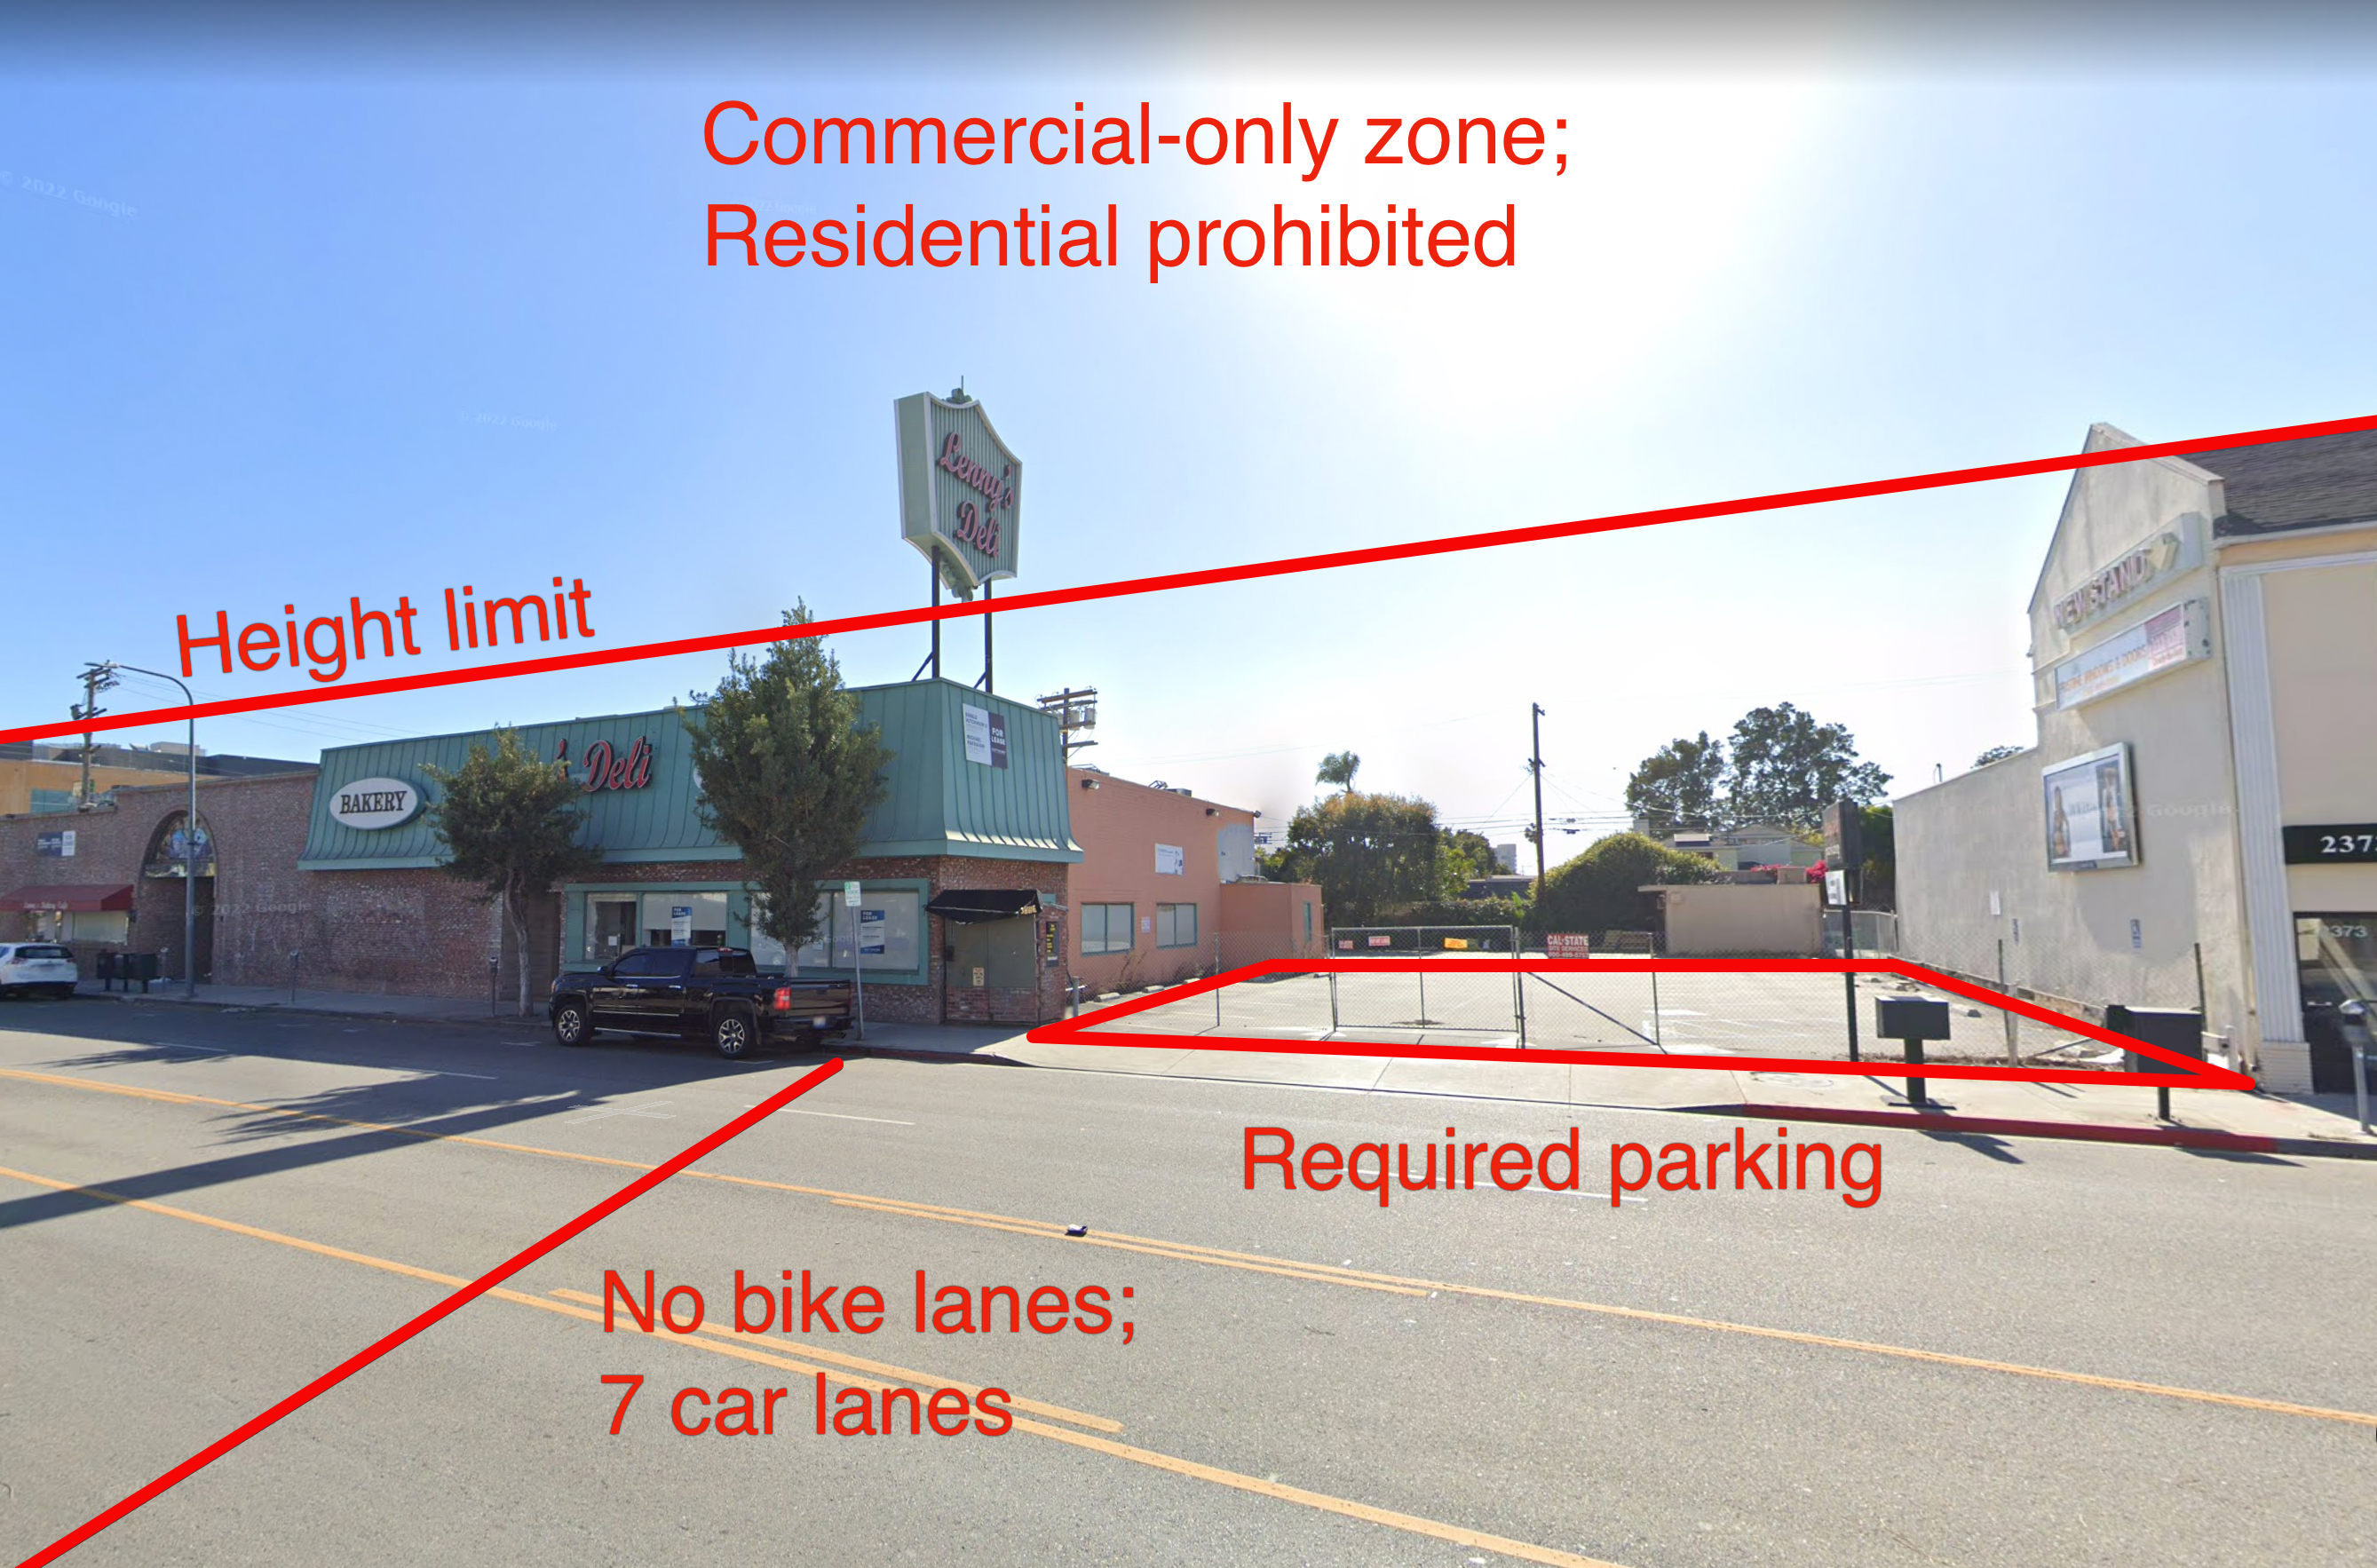 The earlier picture of a street in West LA with commercial businesses and parking lots. Labels point out the low height limit, large amount of required parking, that it is a commercial-only zone with residential prohibited, and that there are no bike lanes and seven car lanes.